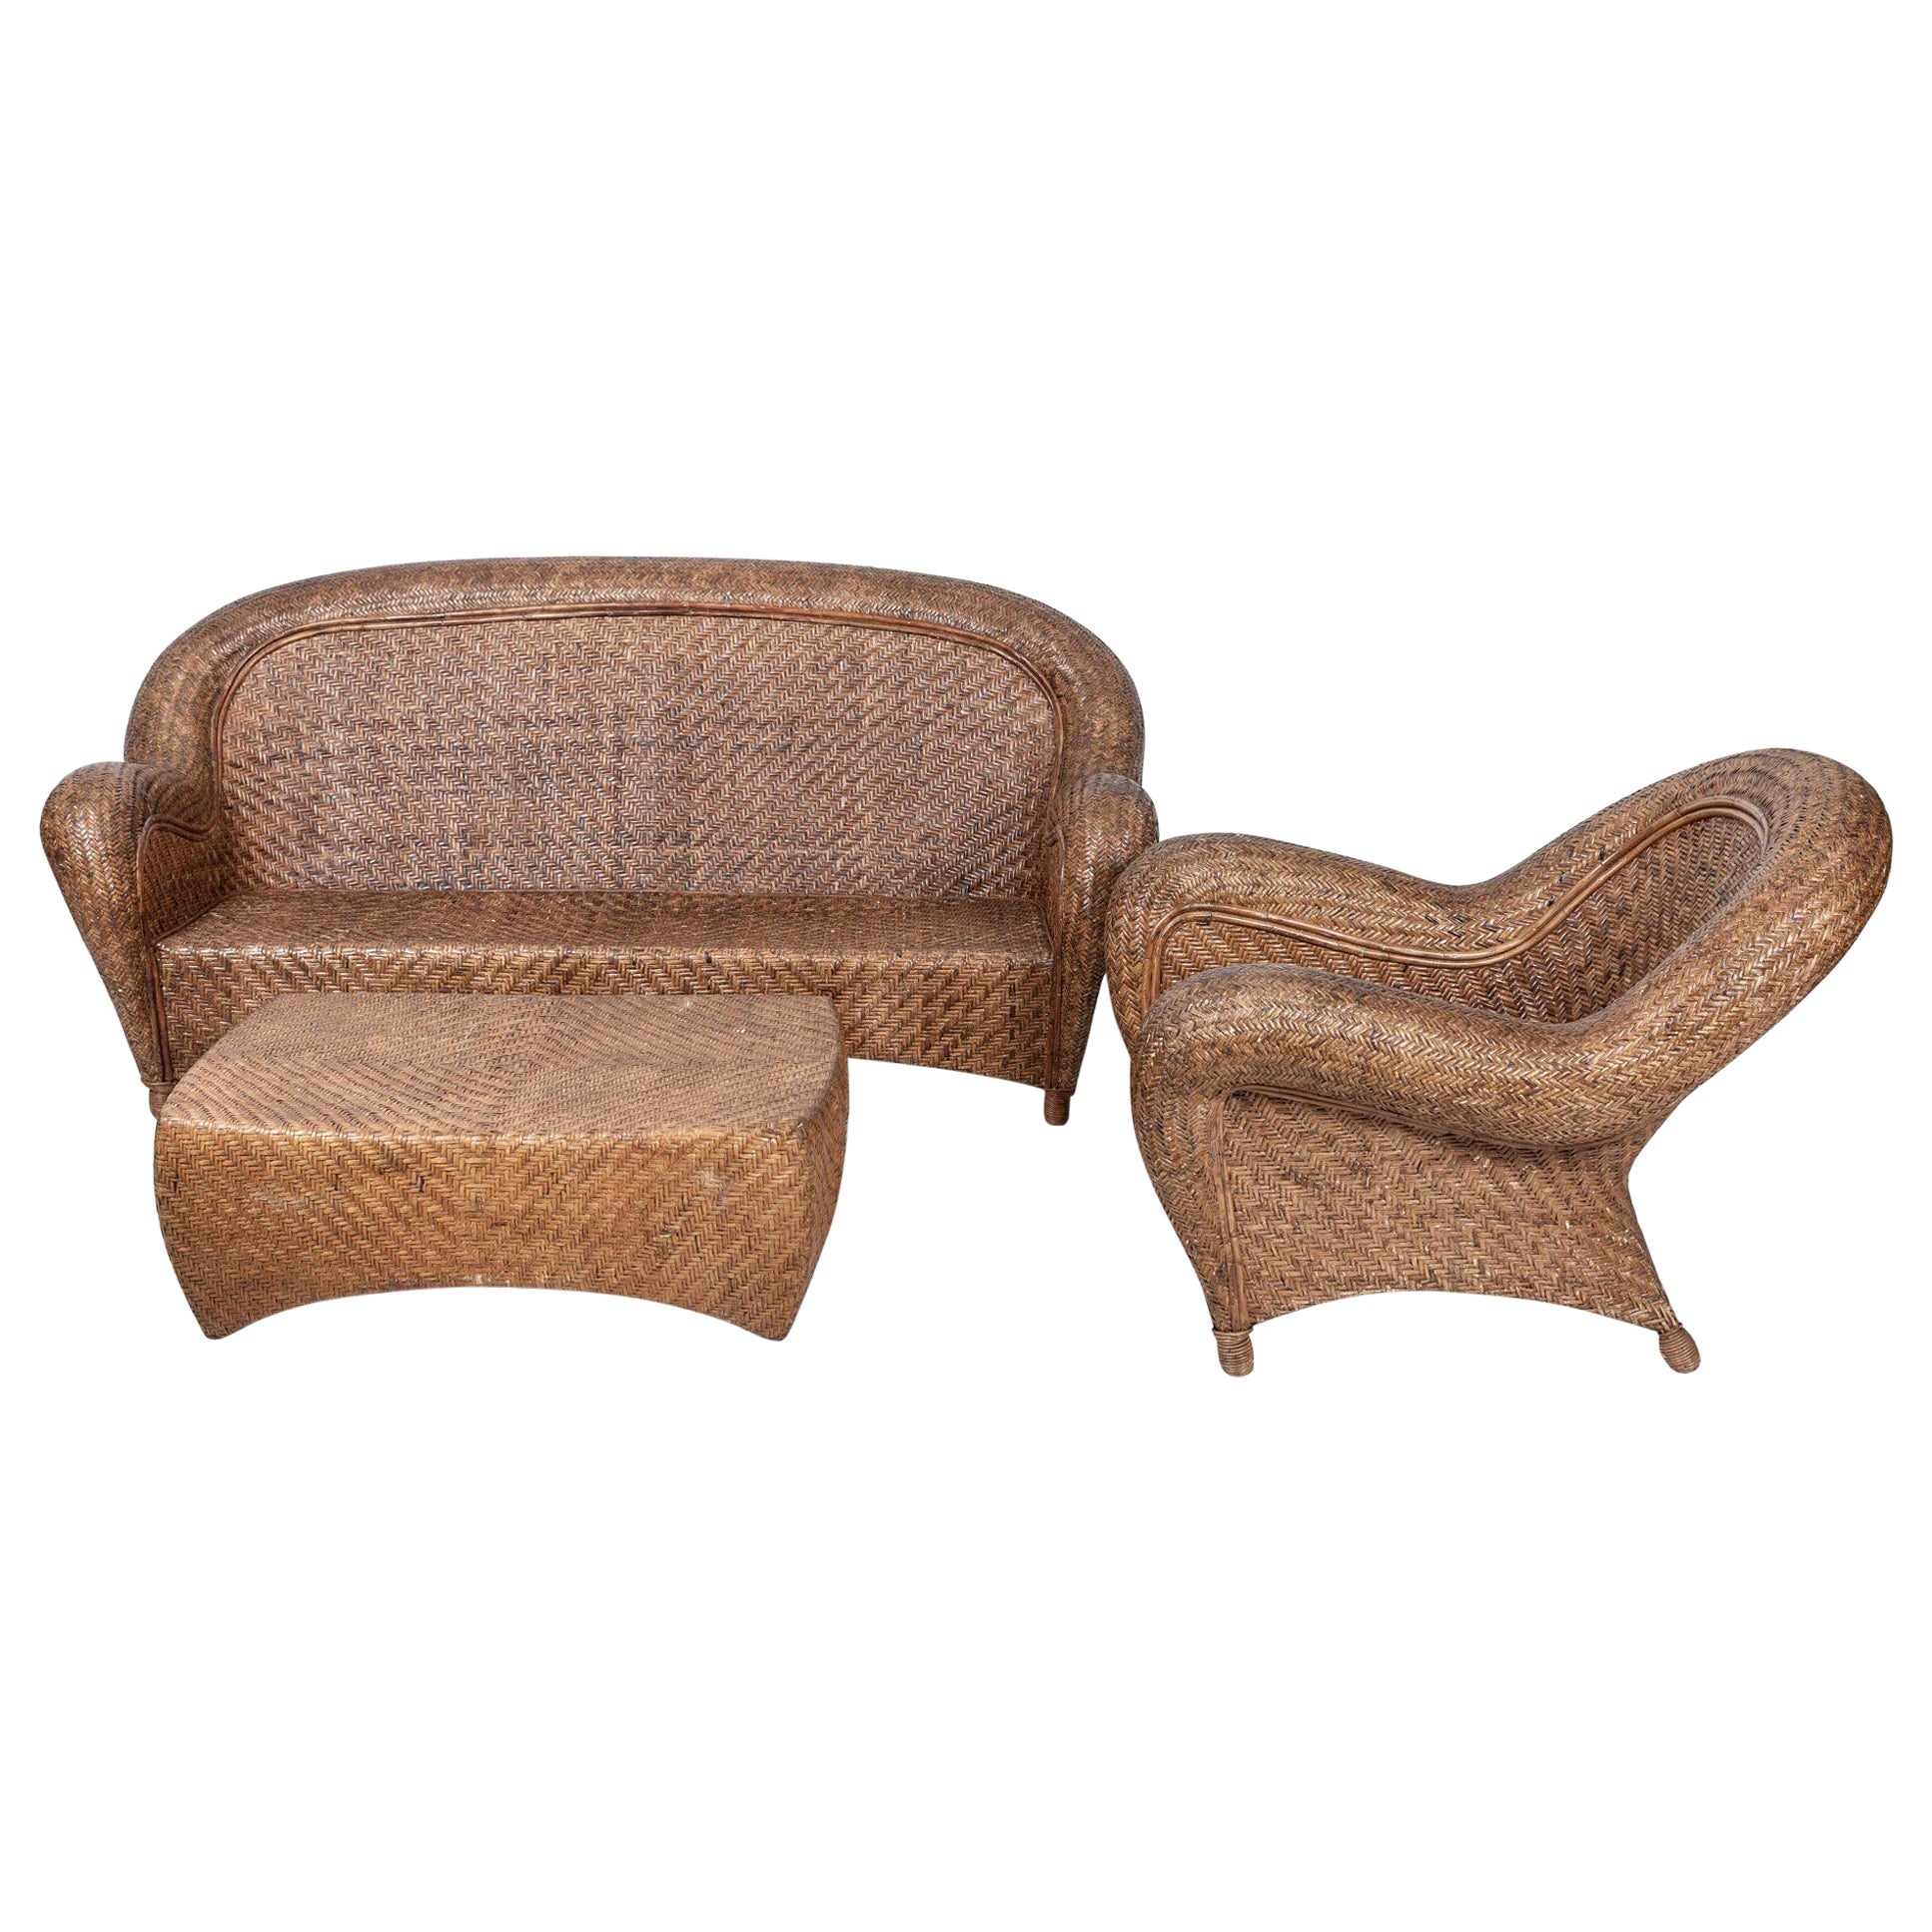 French Bamboo Rattan Sofa Suite For Sale